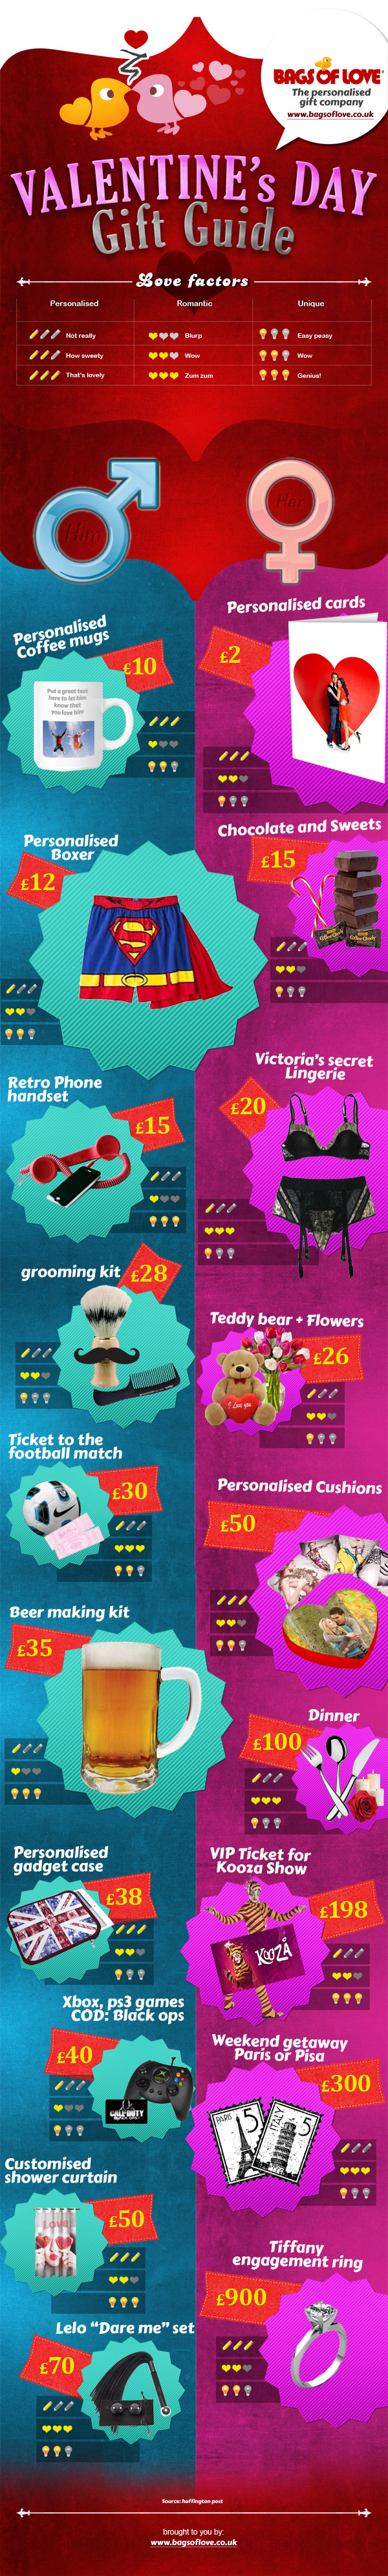 Valentines Day Gift Guide UK Infographic by Bags of Love